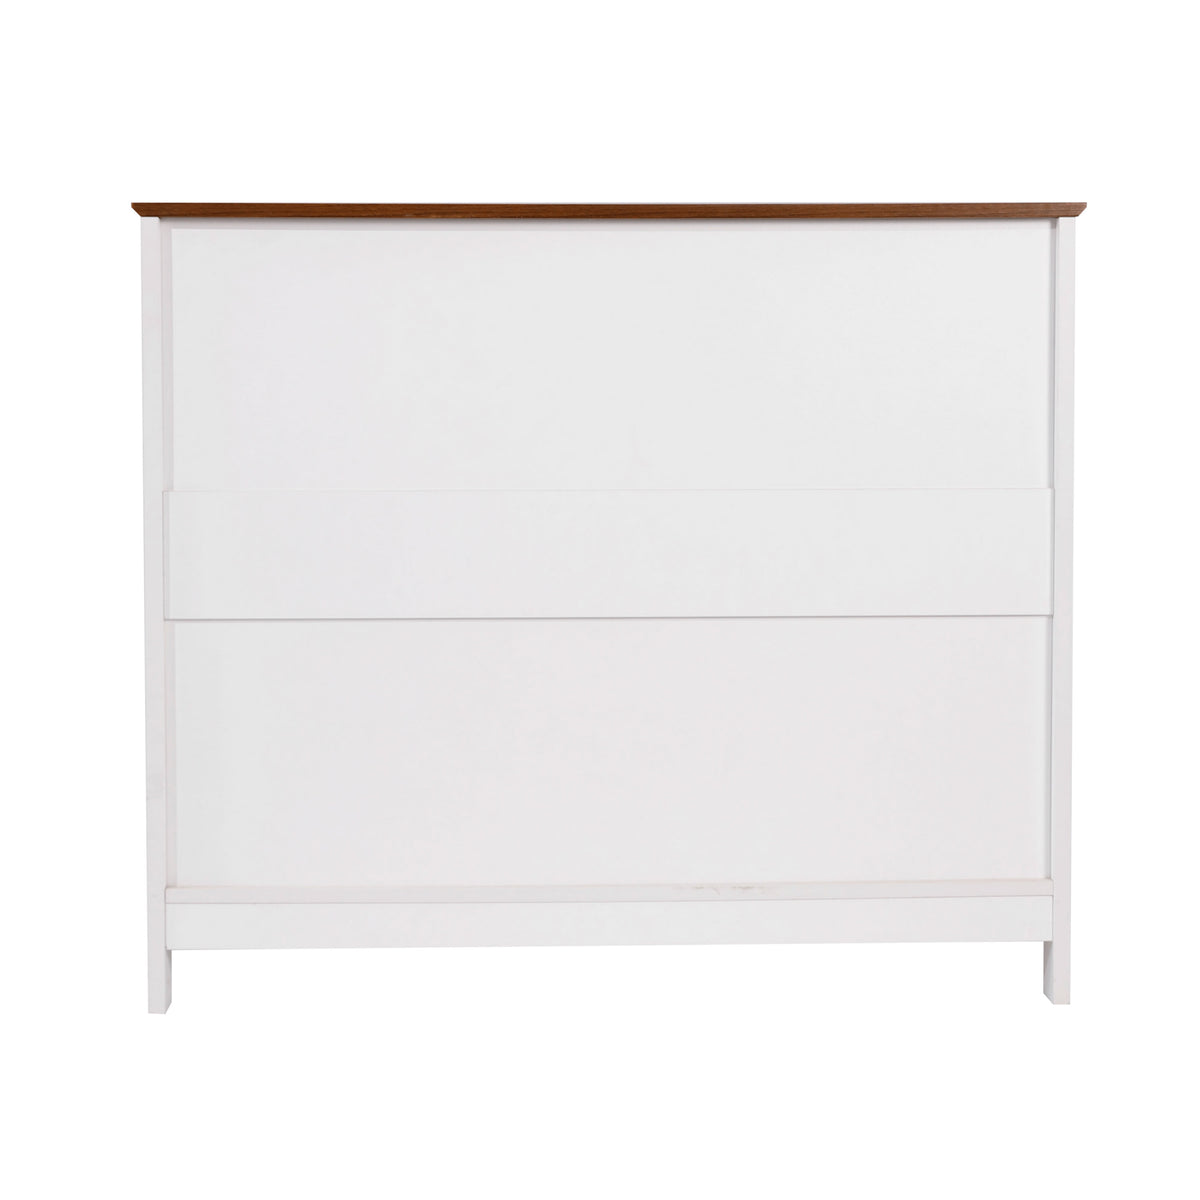 Walnut Top/White Frame |#| Classic Sideboard and Buffet Cabinet with Open and Closed Storage - White/Walnut